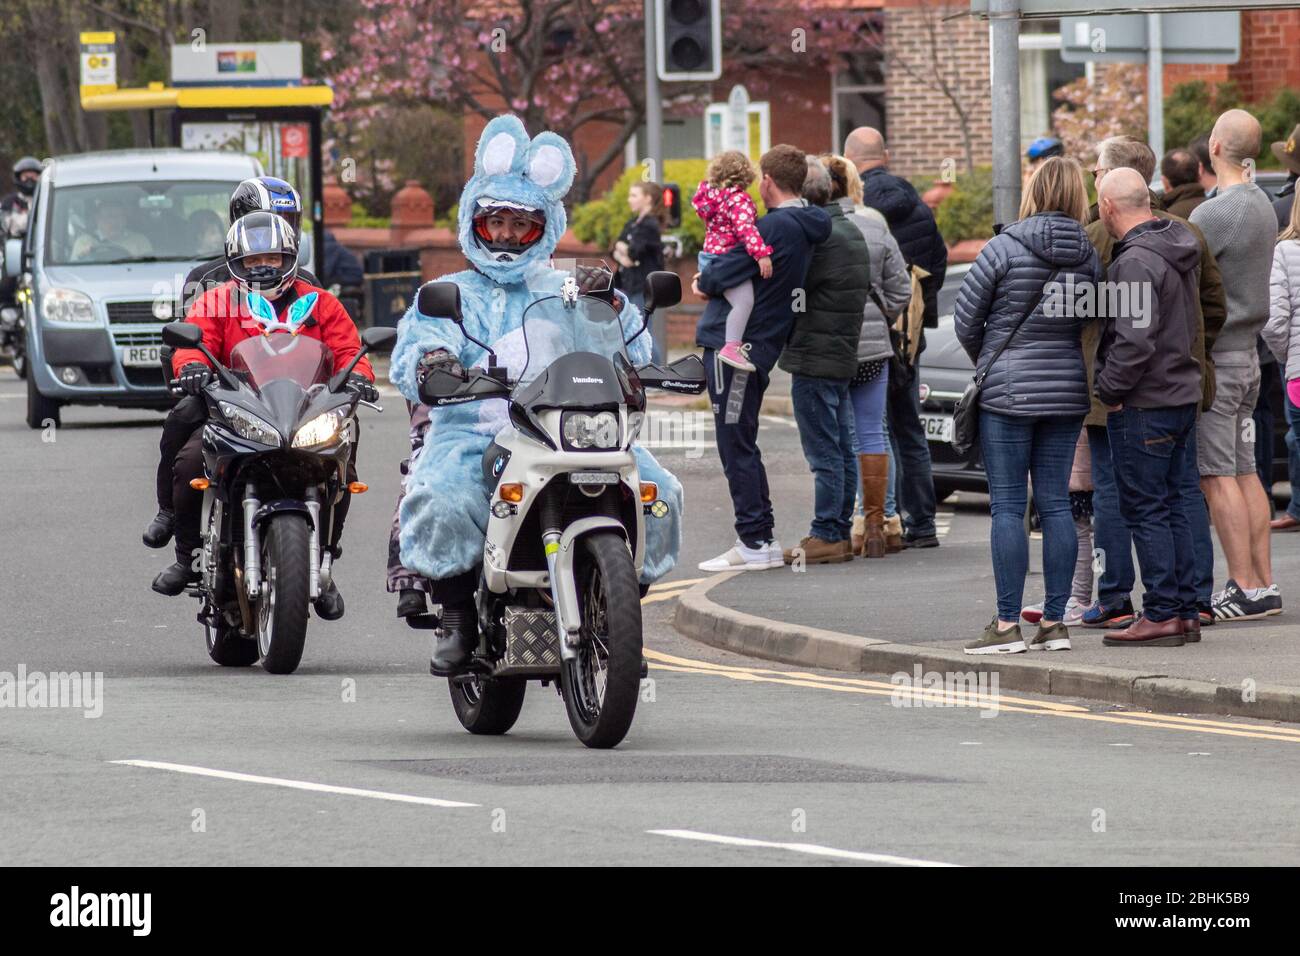 Motorcyclists in costume for 2019 Wirral Easter Egg Run charity event, Grange Road, West Kirby Stock Photo